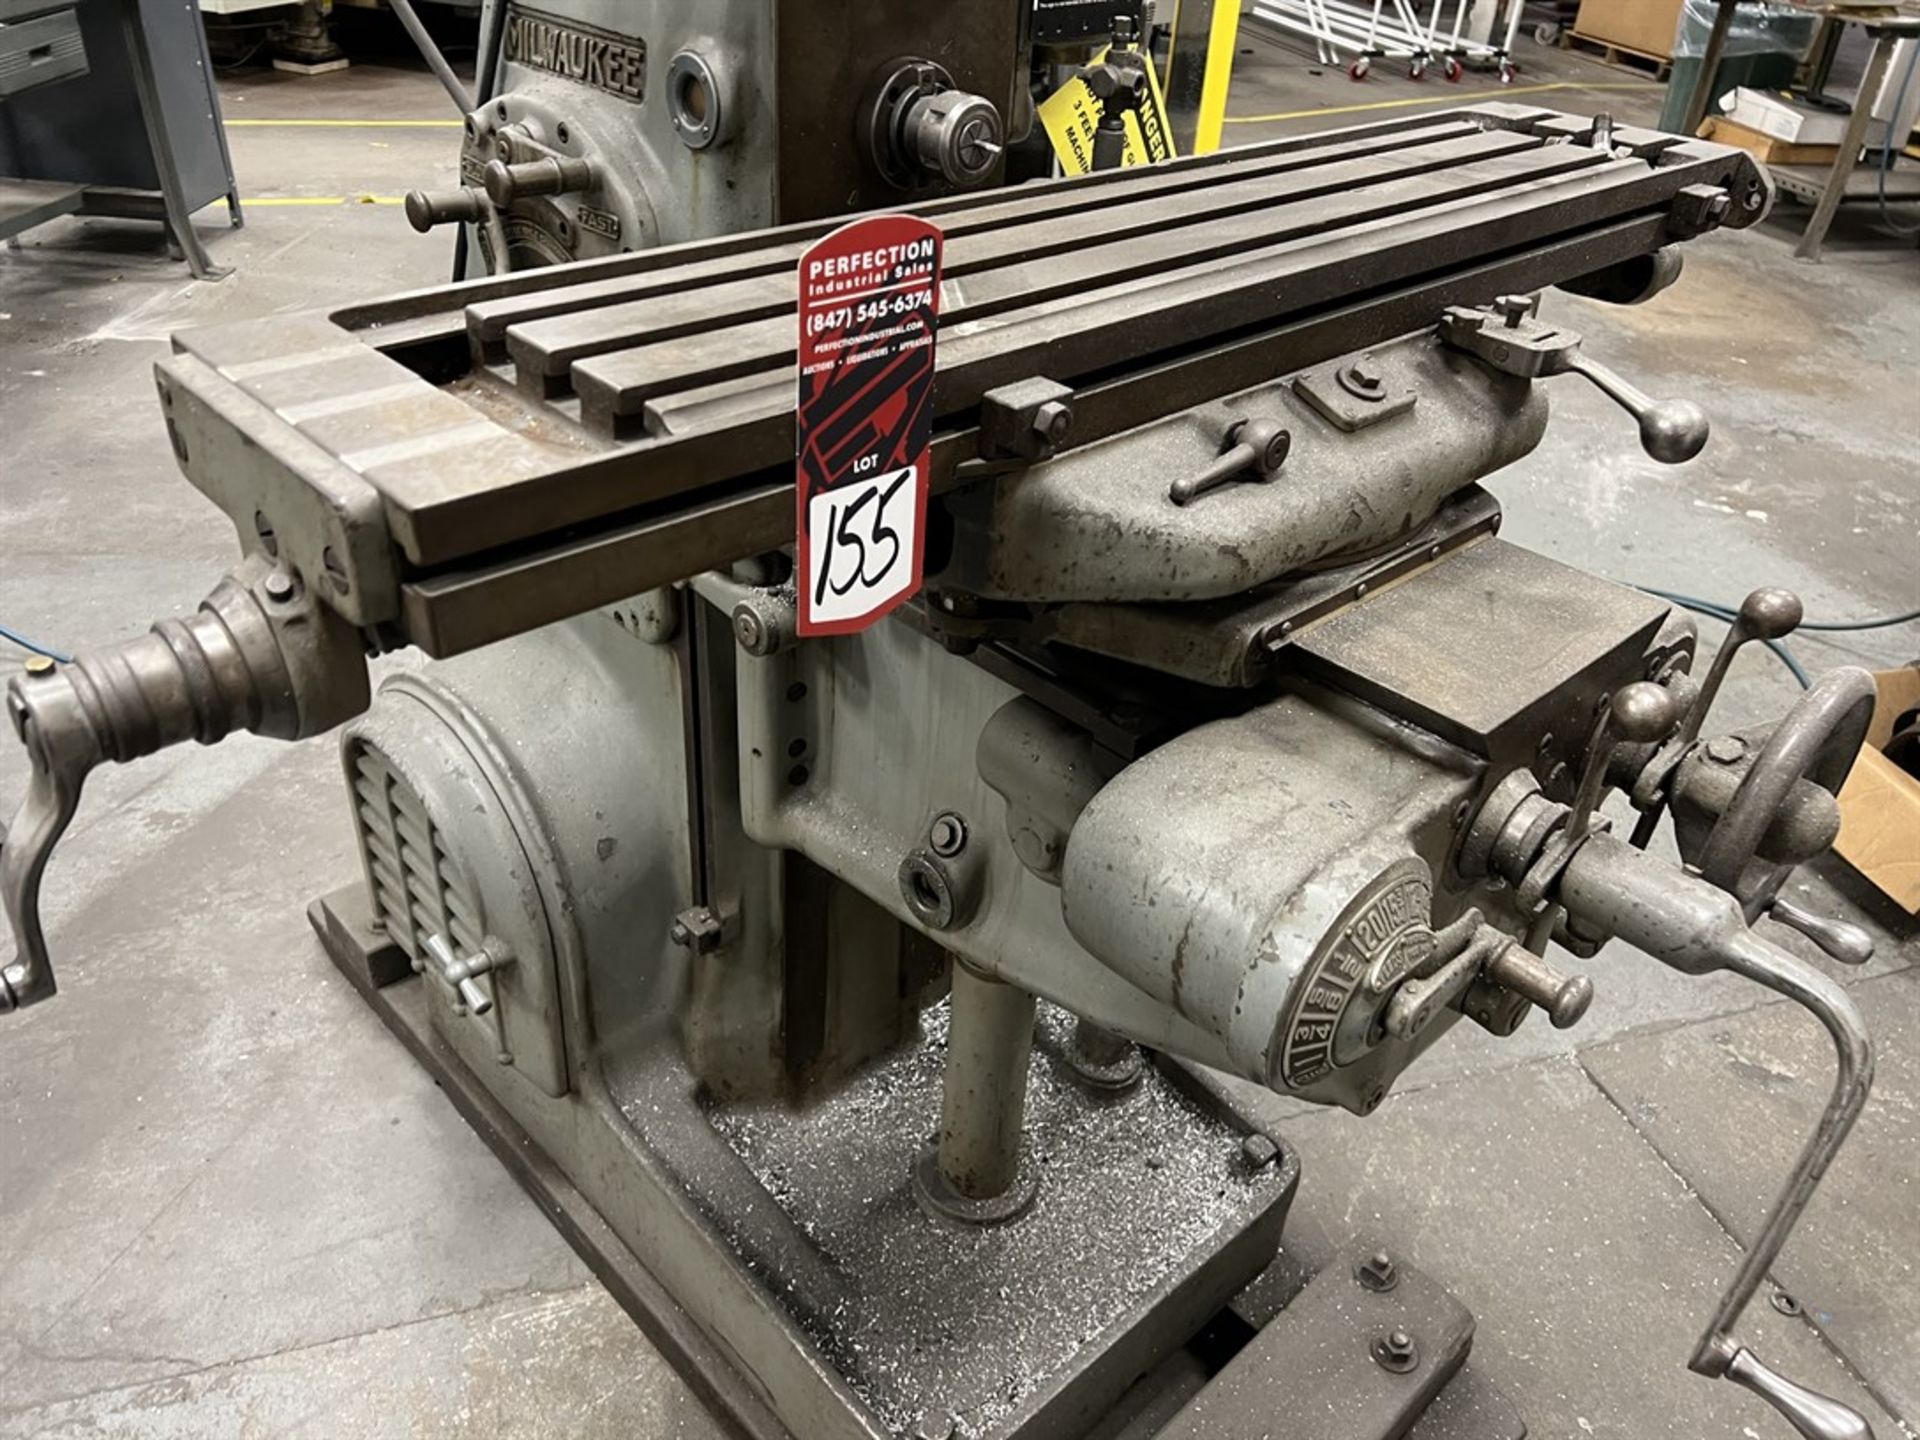 MILWAUKEE H Horizontal Mill, s/n 454412, 35-1400 RPM, 9” x 46” Table (A removal/rigging fee of $ - Image 3 of 6